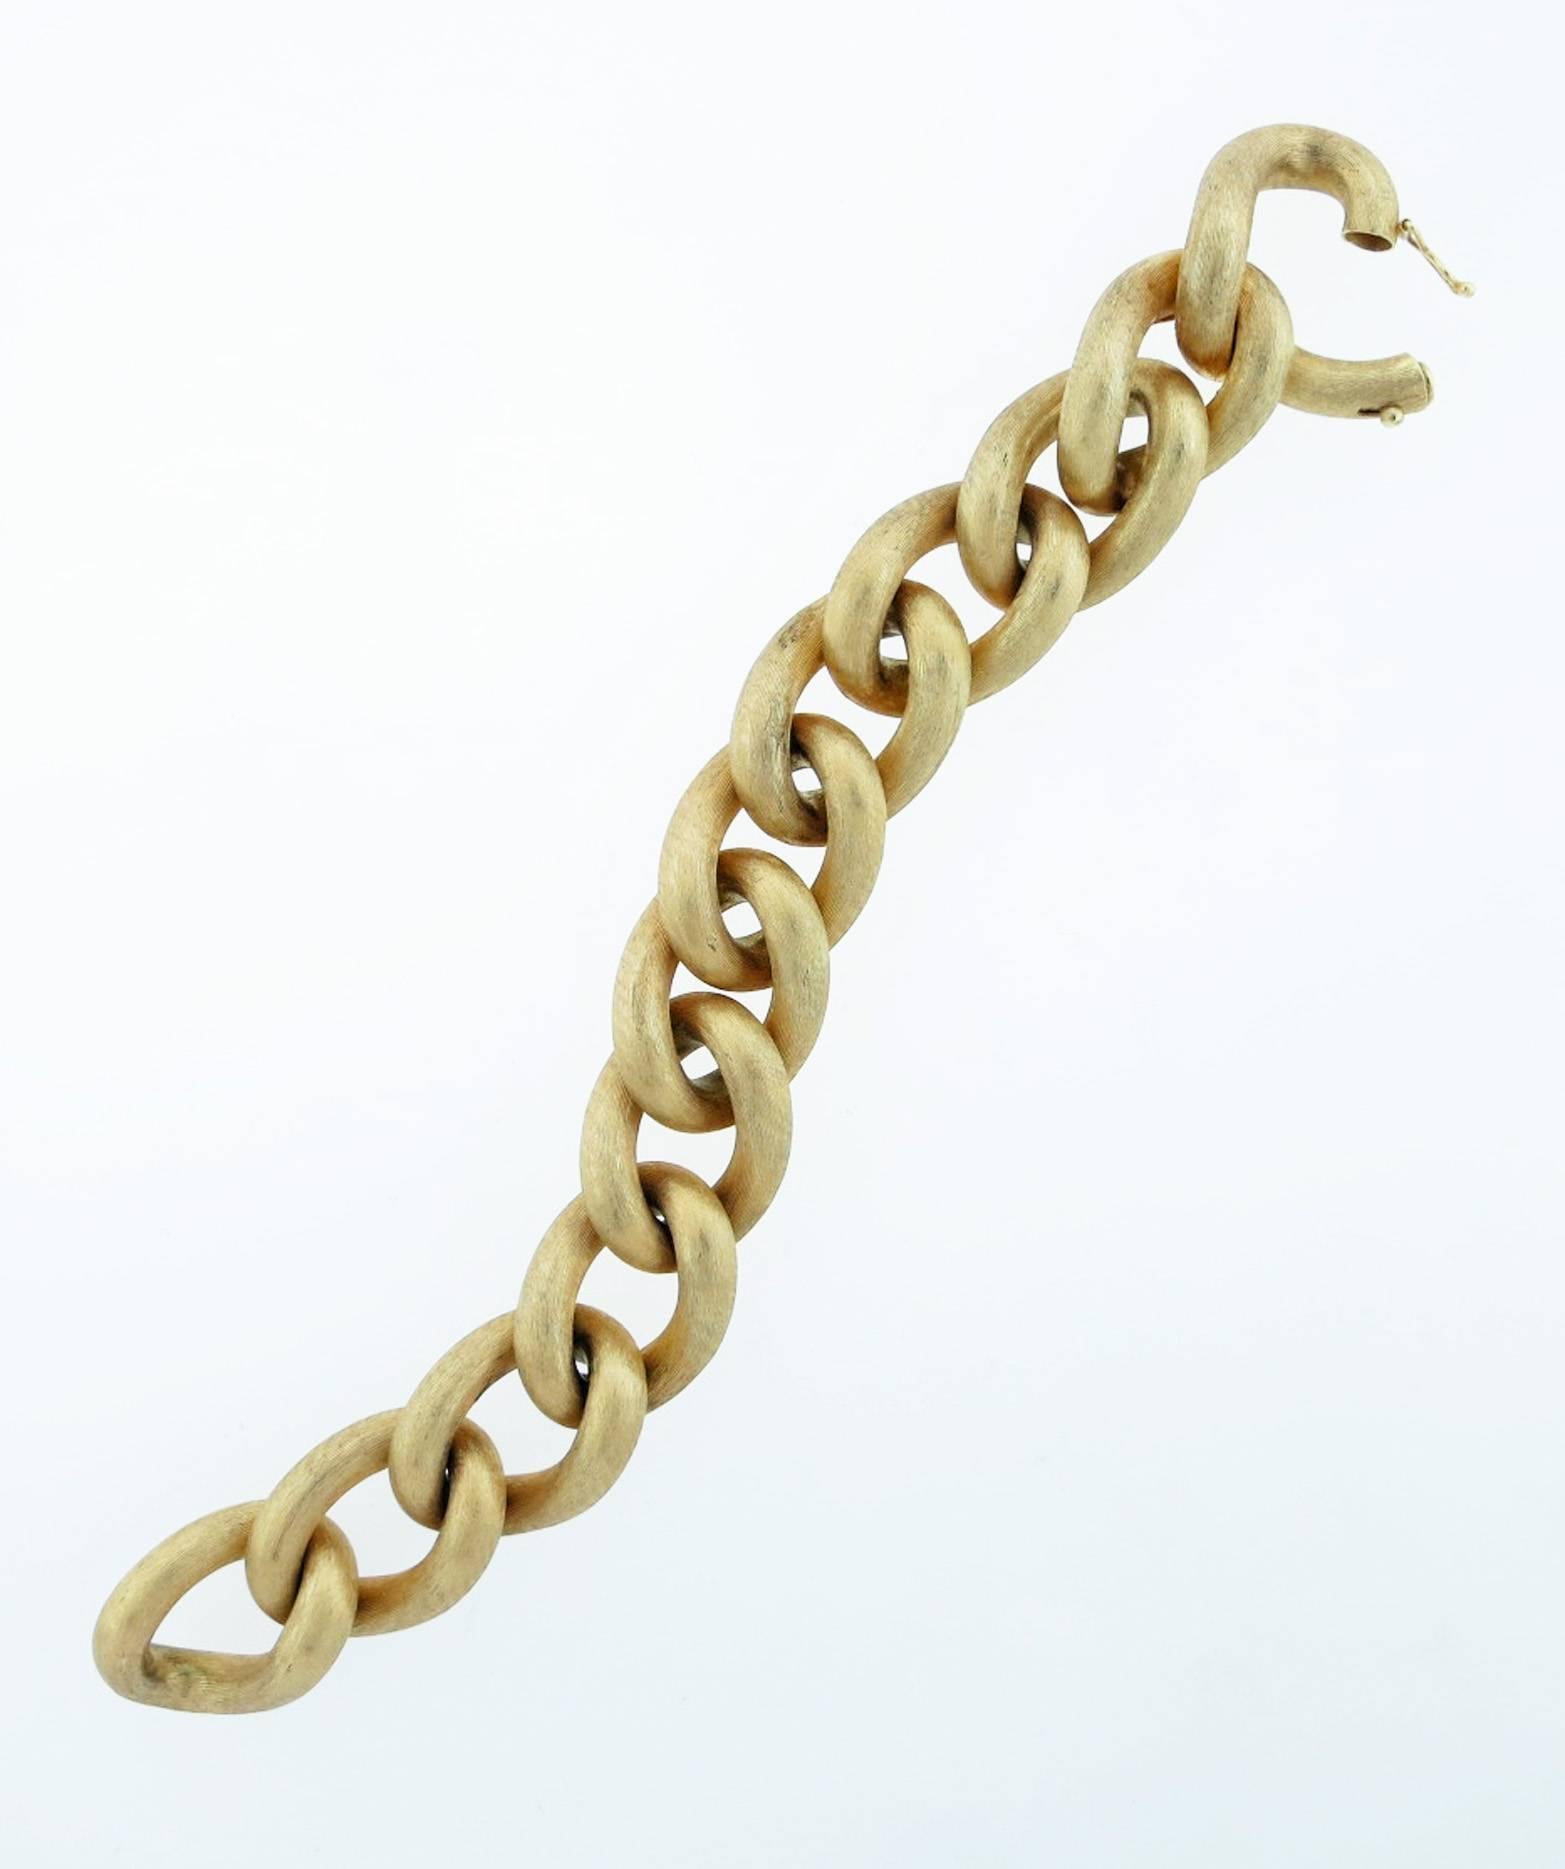 Classic Italian 14kt yellow gold bracelet measuring 8 inches in length weighing 57.8 gr. Each of the 12 curb design links measures approx  3/5 inches wide. Hidden catch .